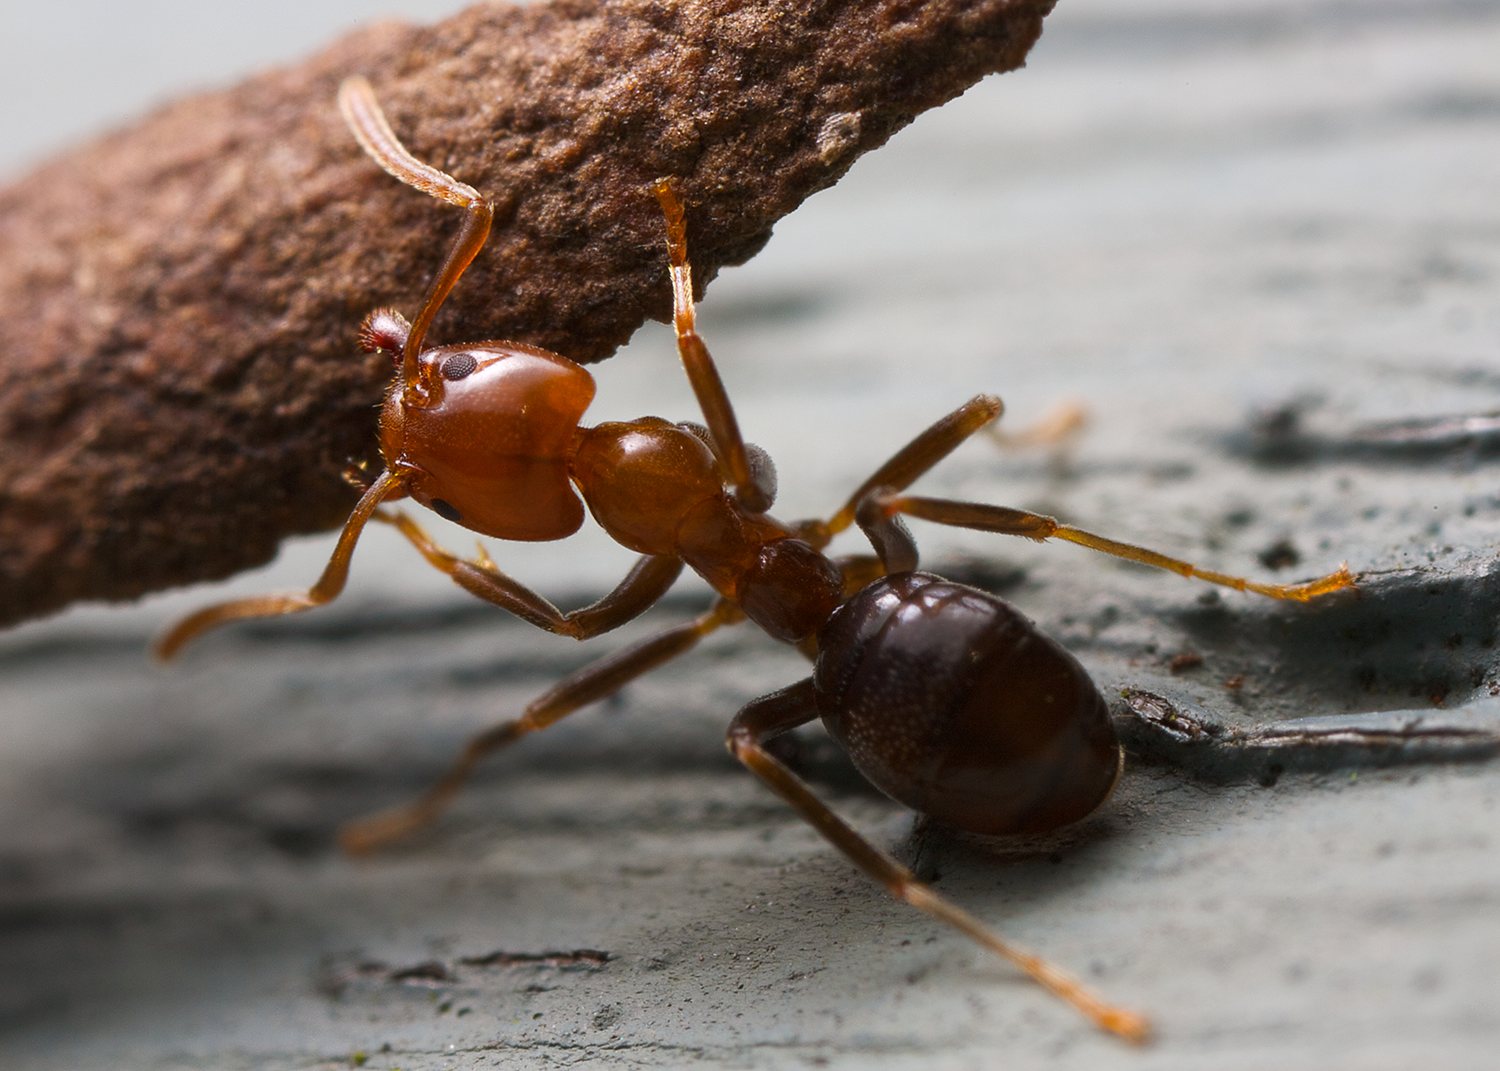 Pavement Ants – A Common Household Pest